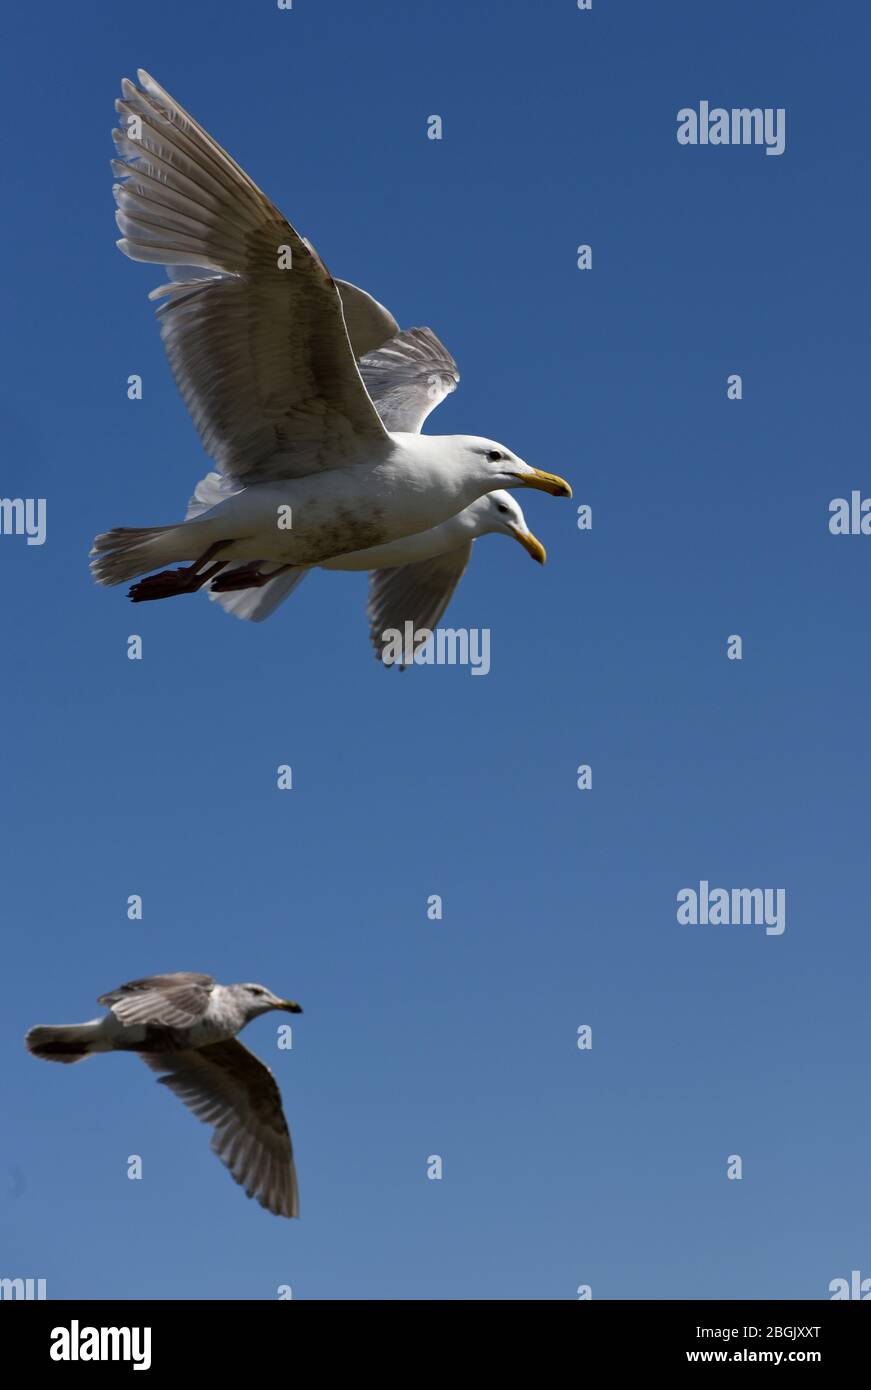 A trio of sea gulls fly with wings spread out against a blue sky in Victoria, British Columbia, Canada on Vancouver Island. Stock Photo